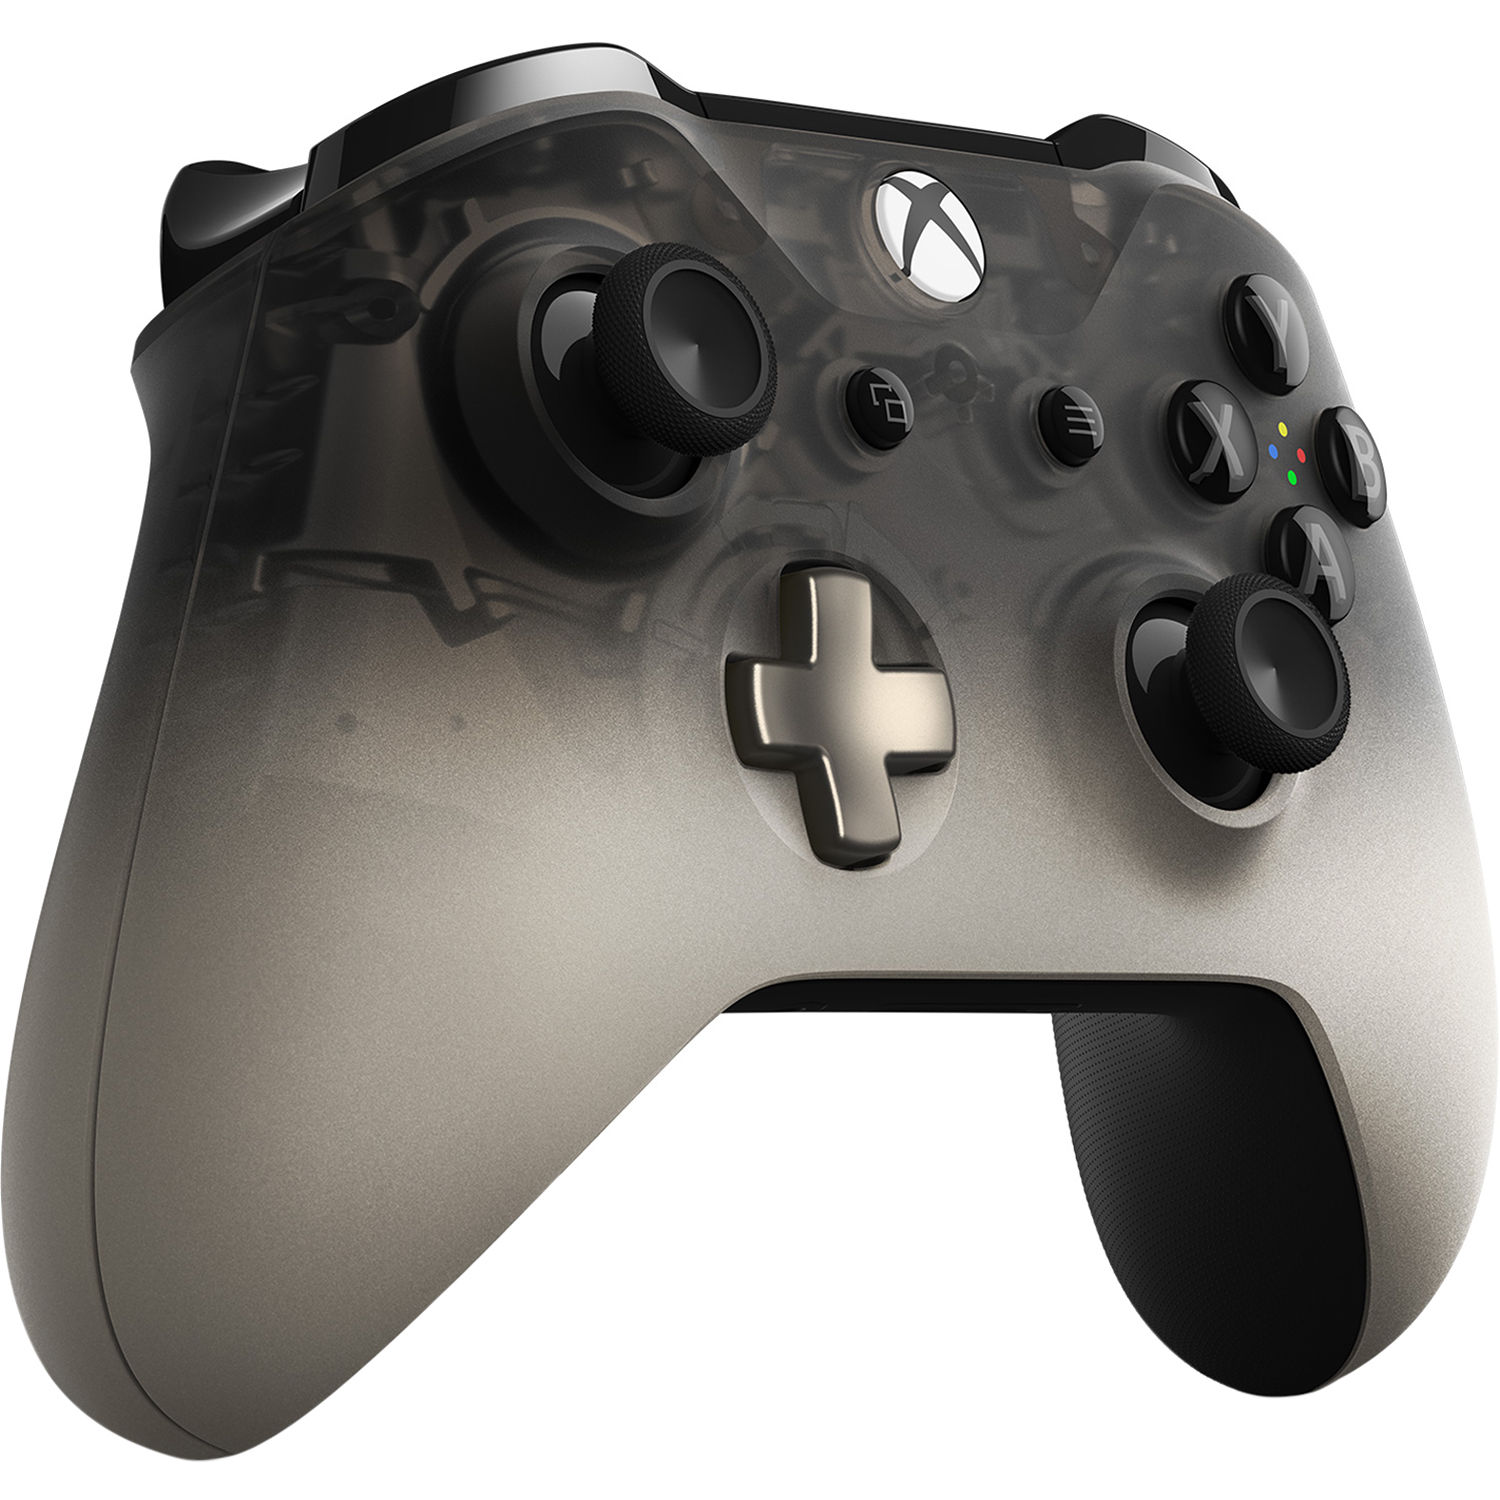 official xbox one controller wireless